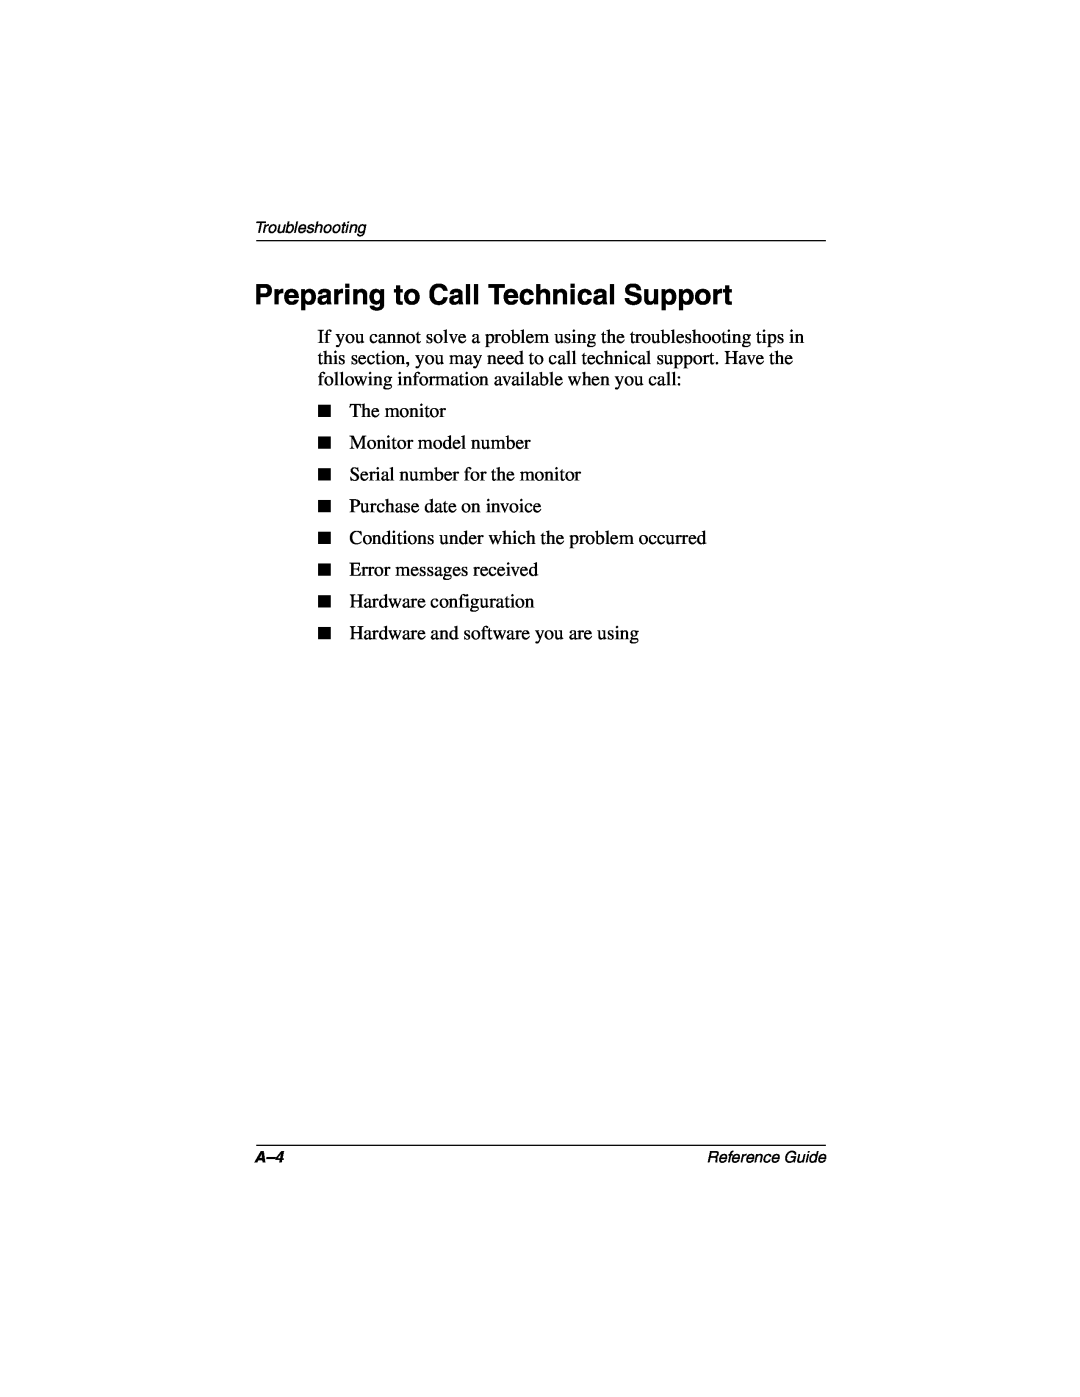 Compaq 5017 manual Preparing to Call Technical Support 